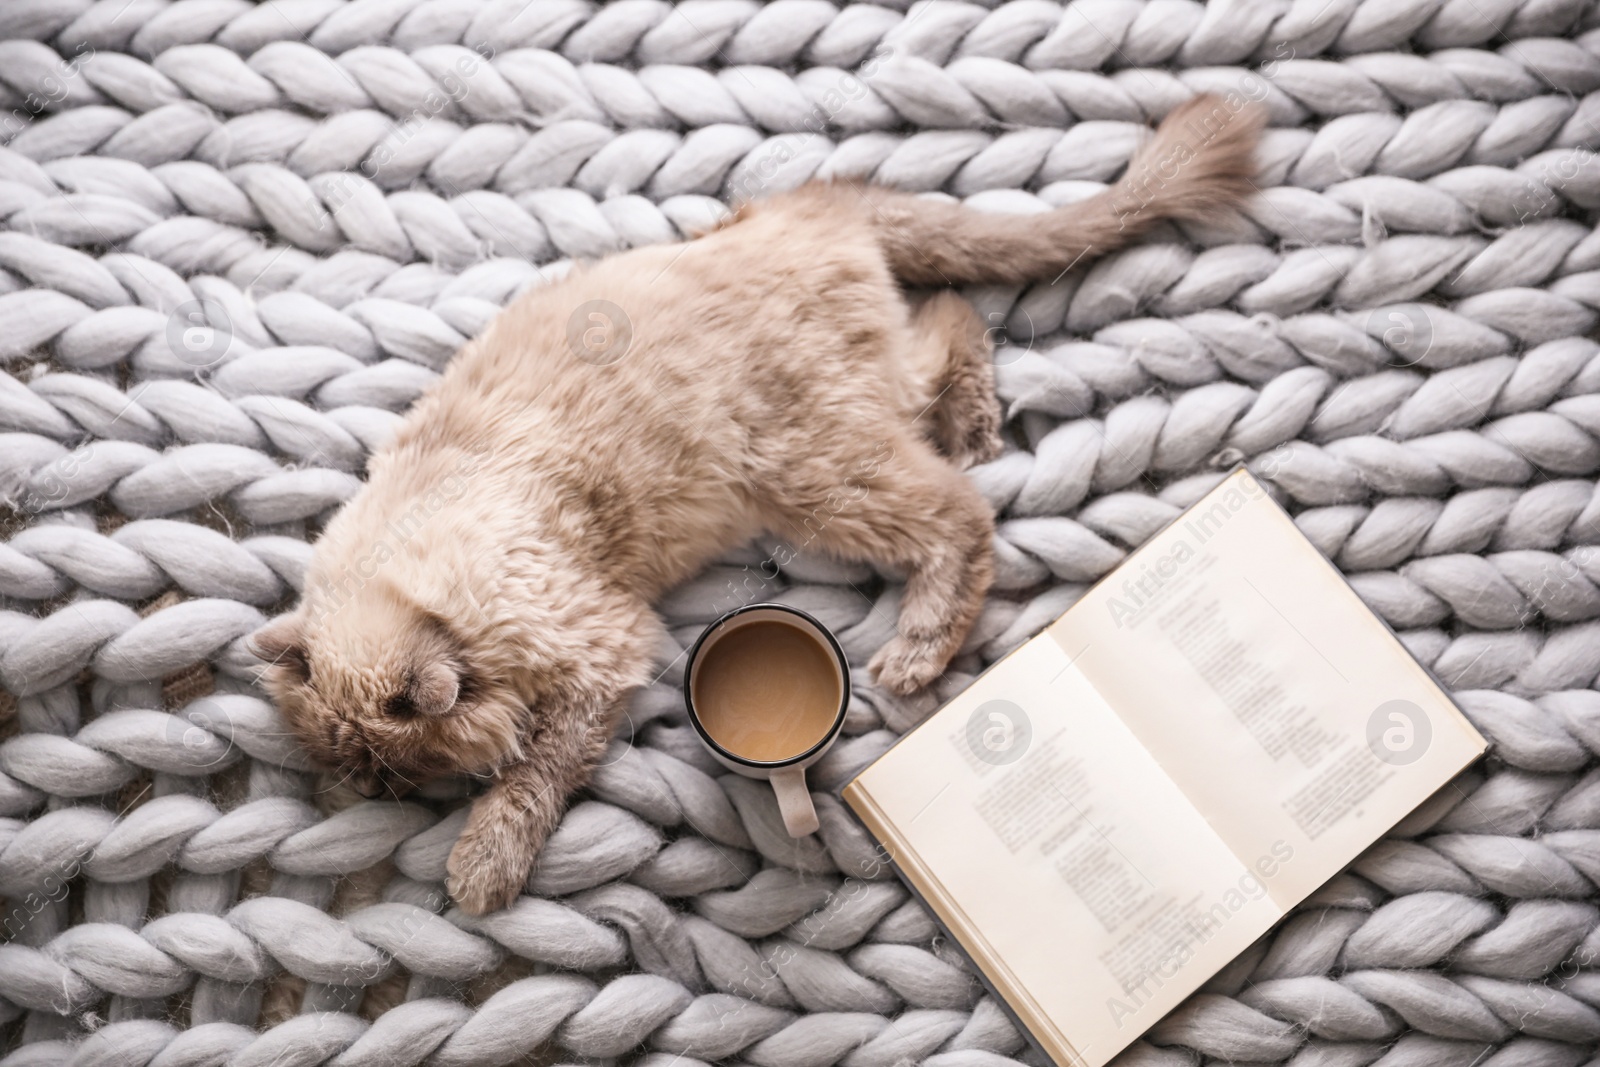 Photo of Birman cat, book and cup of drink on knitted blanket at home, above view. Cute pet